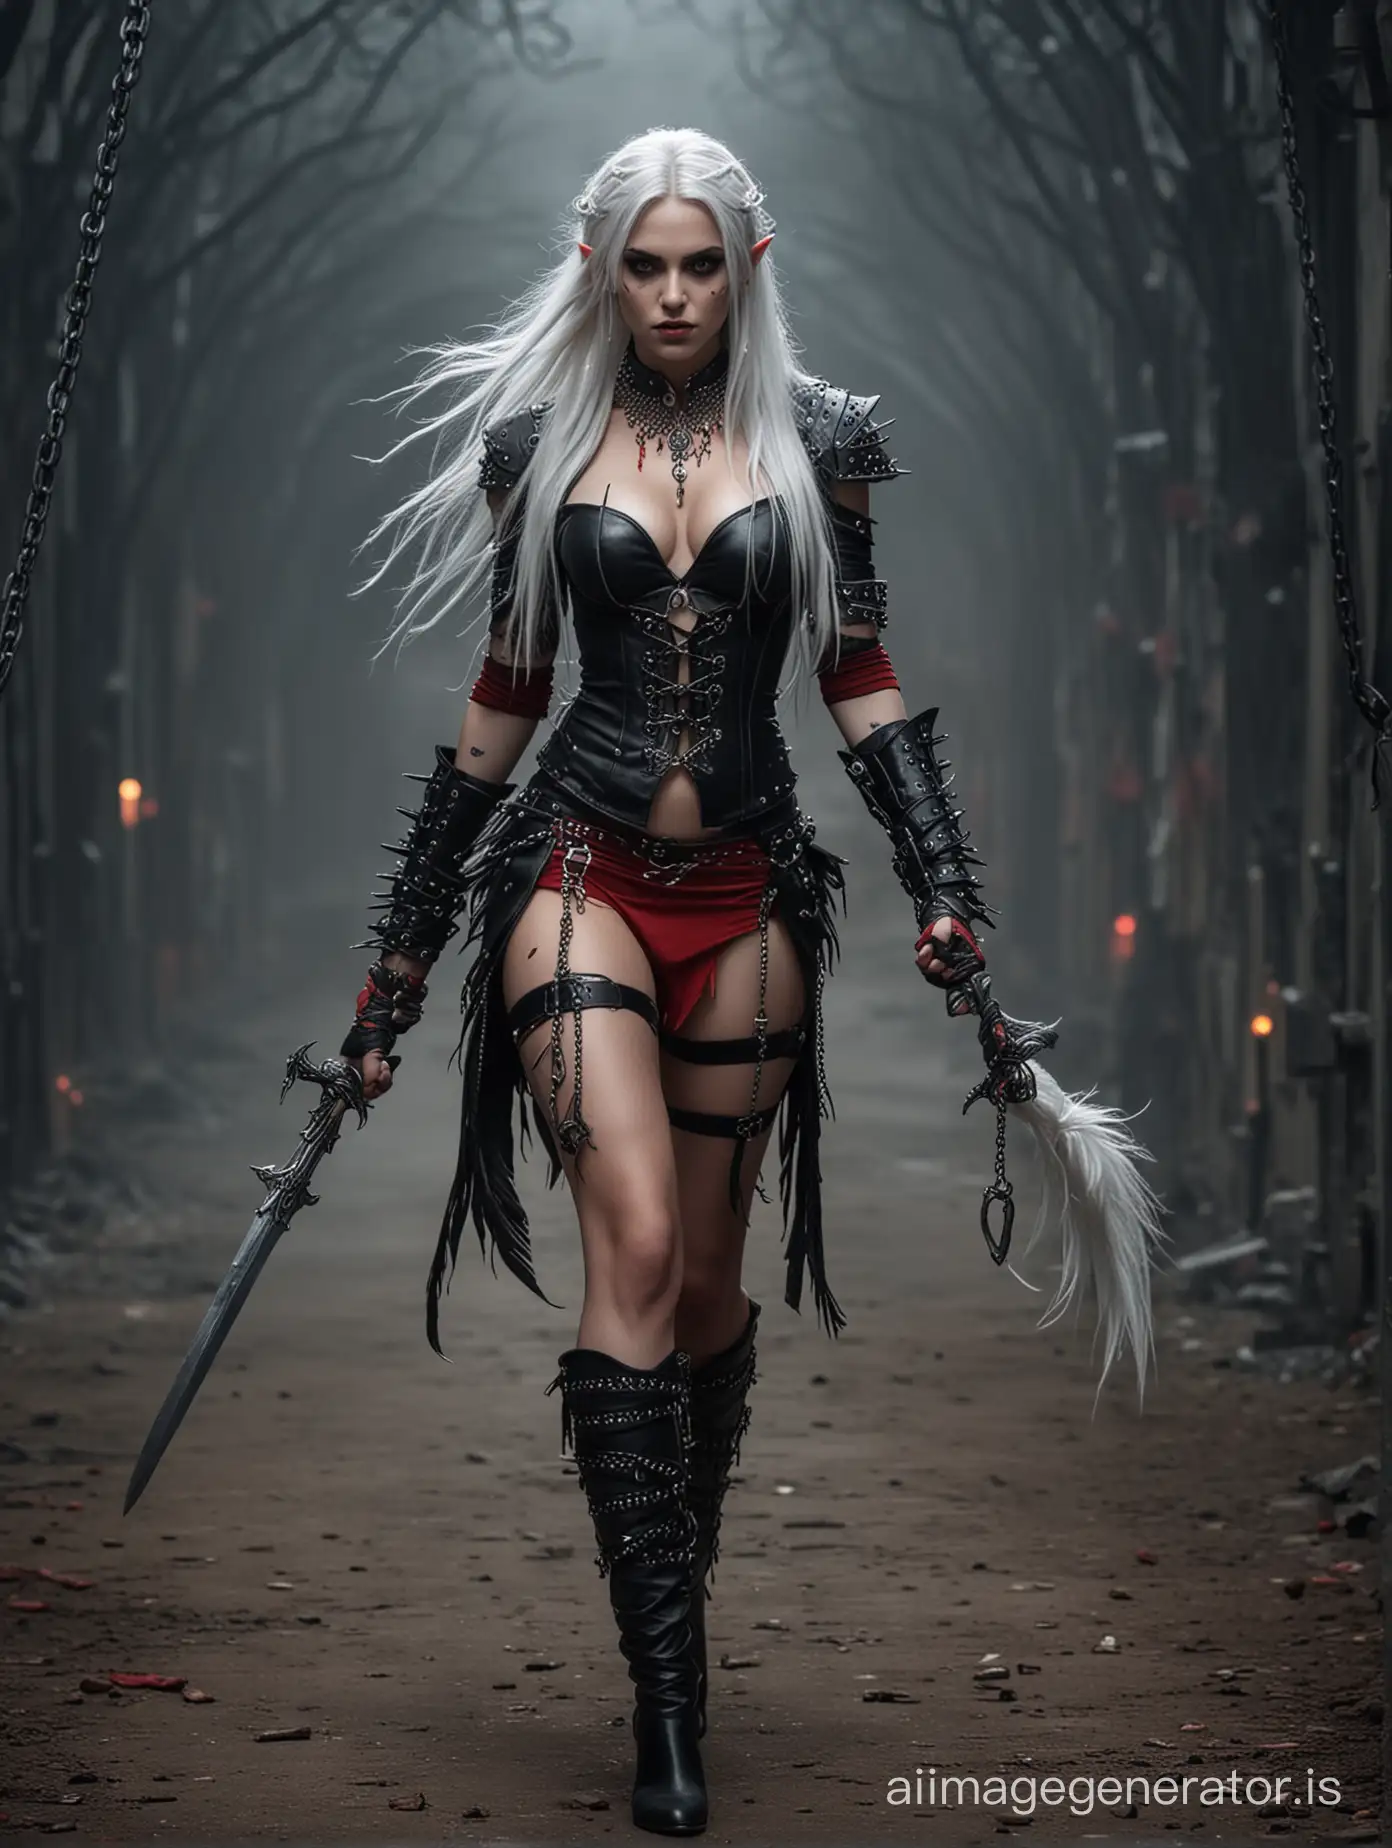 Young thin sexy female elf with very long white hair, grey skin, red tattoos, black glowing eyes and running eye makeup. Wearing red spiked studded leather with black feathers. carrying  dagger and chains. Background is dark and full of shadows